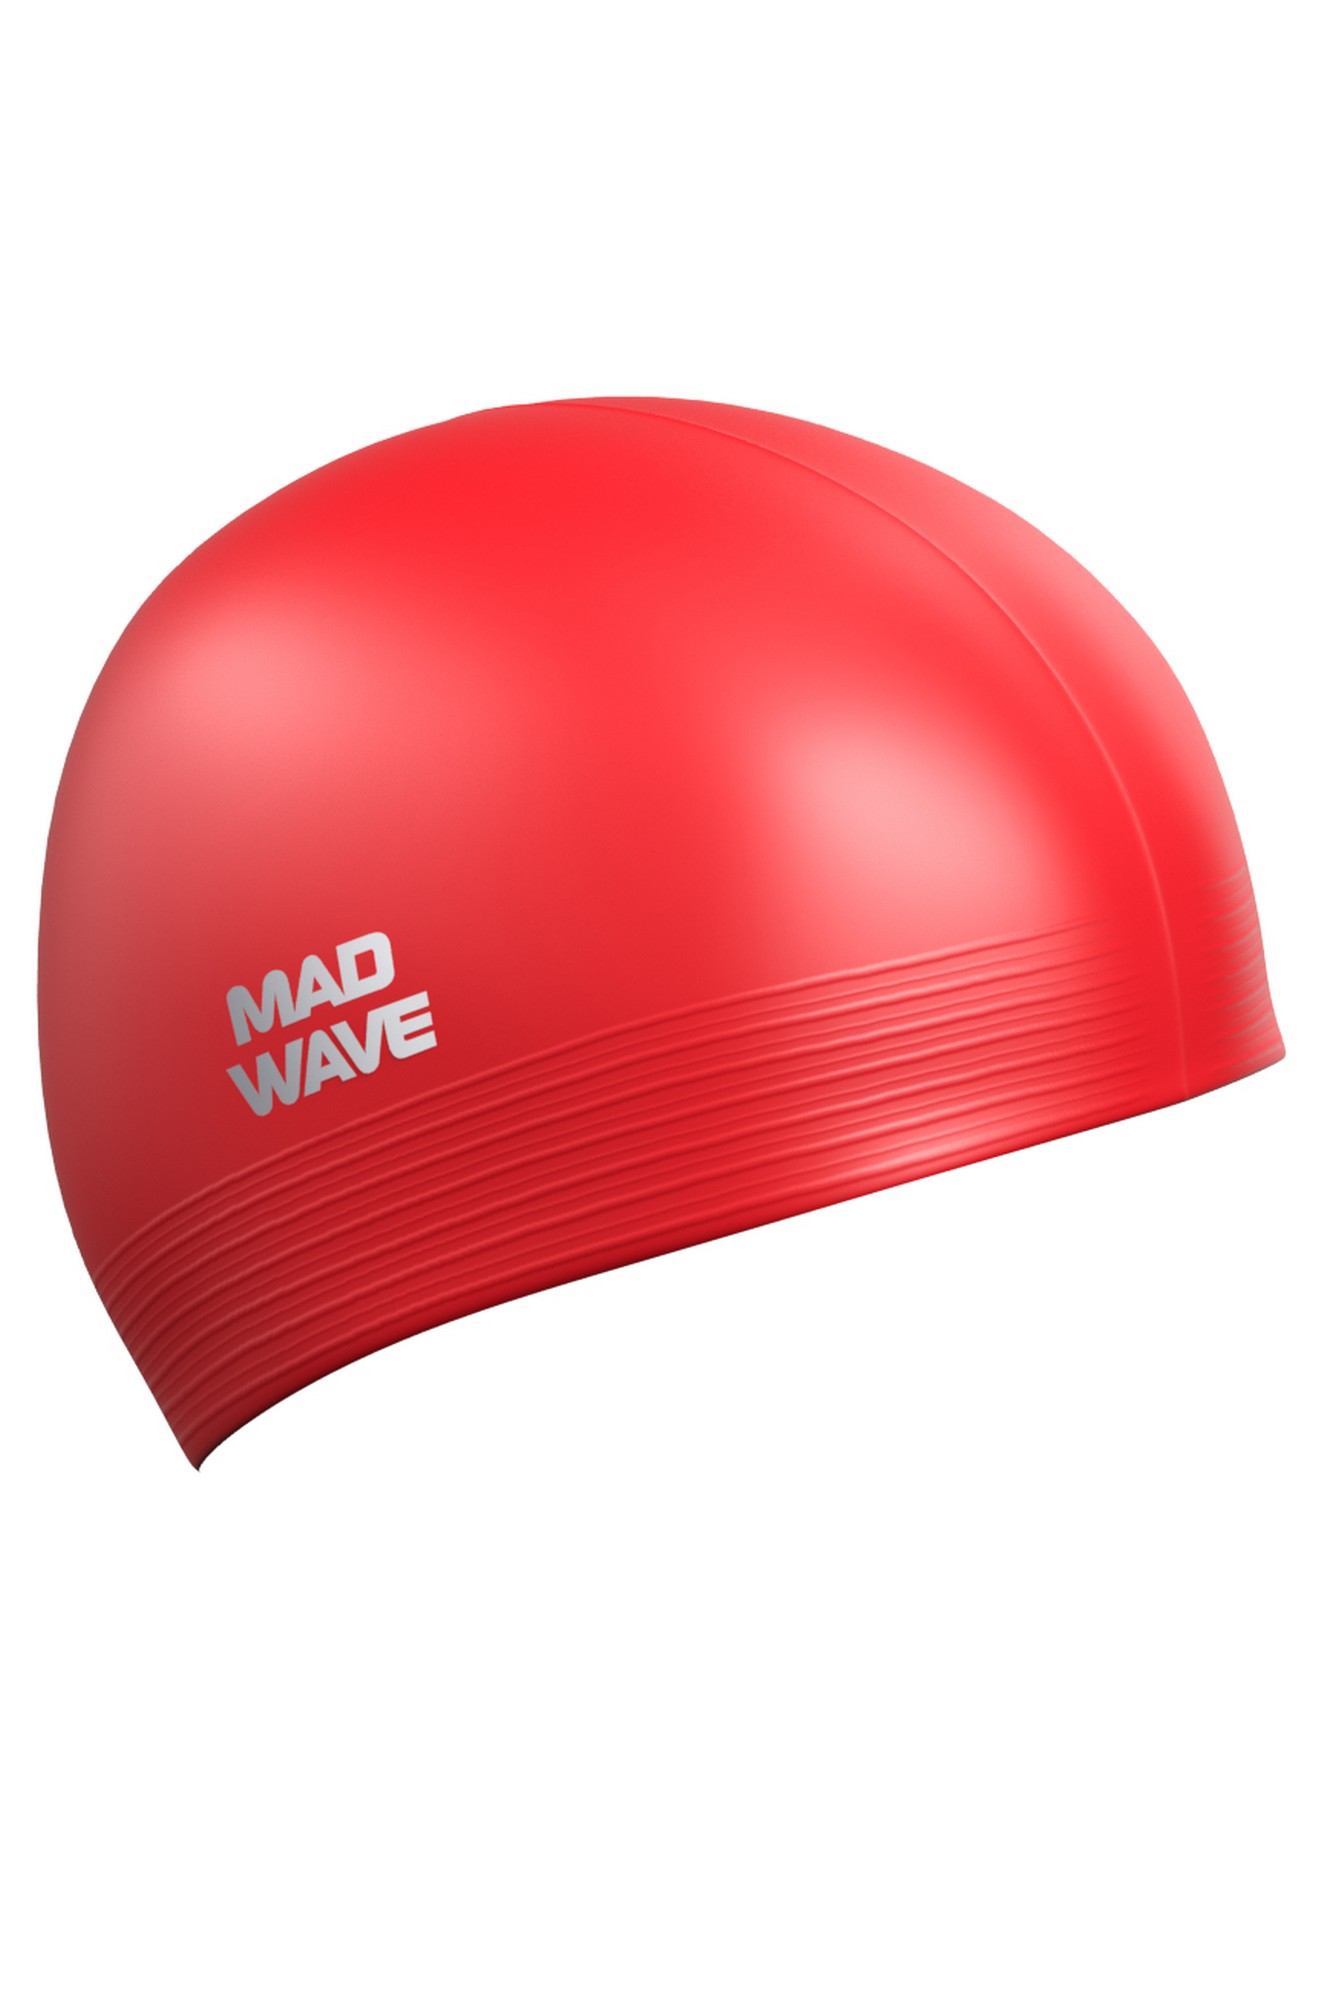   Mad Wave Solid Soft M0565 02 0 05W 